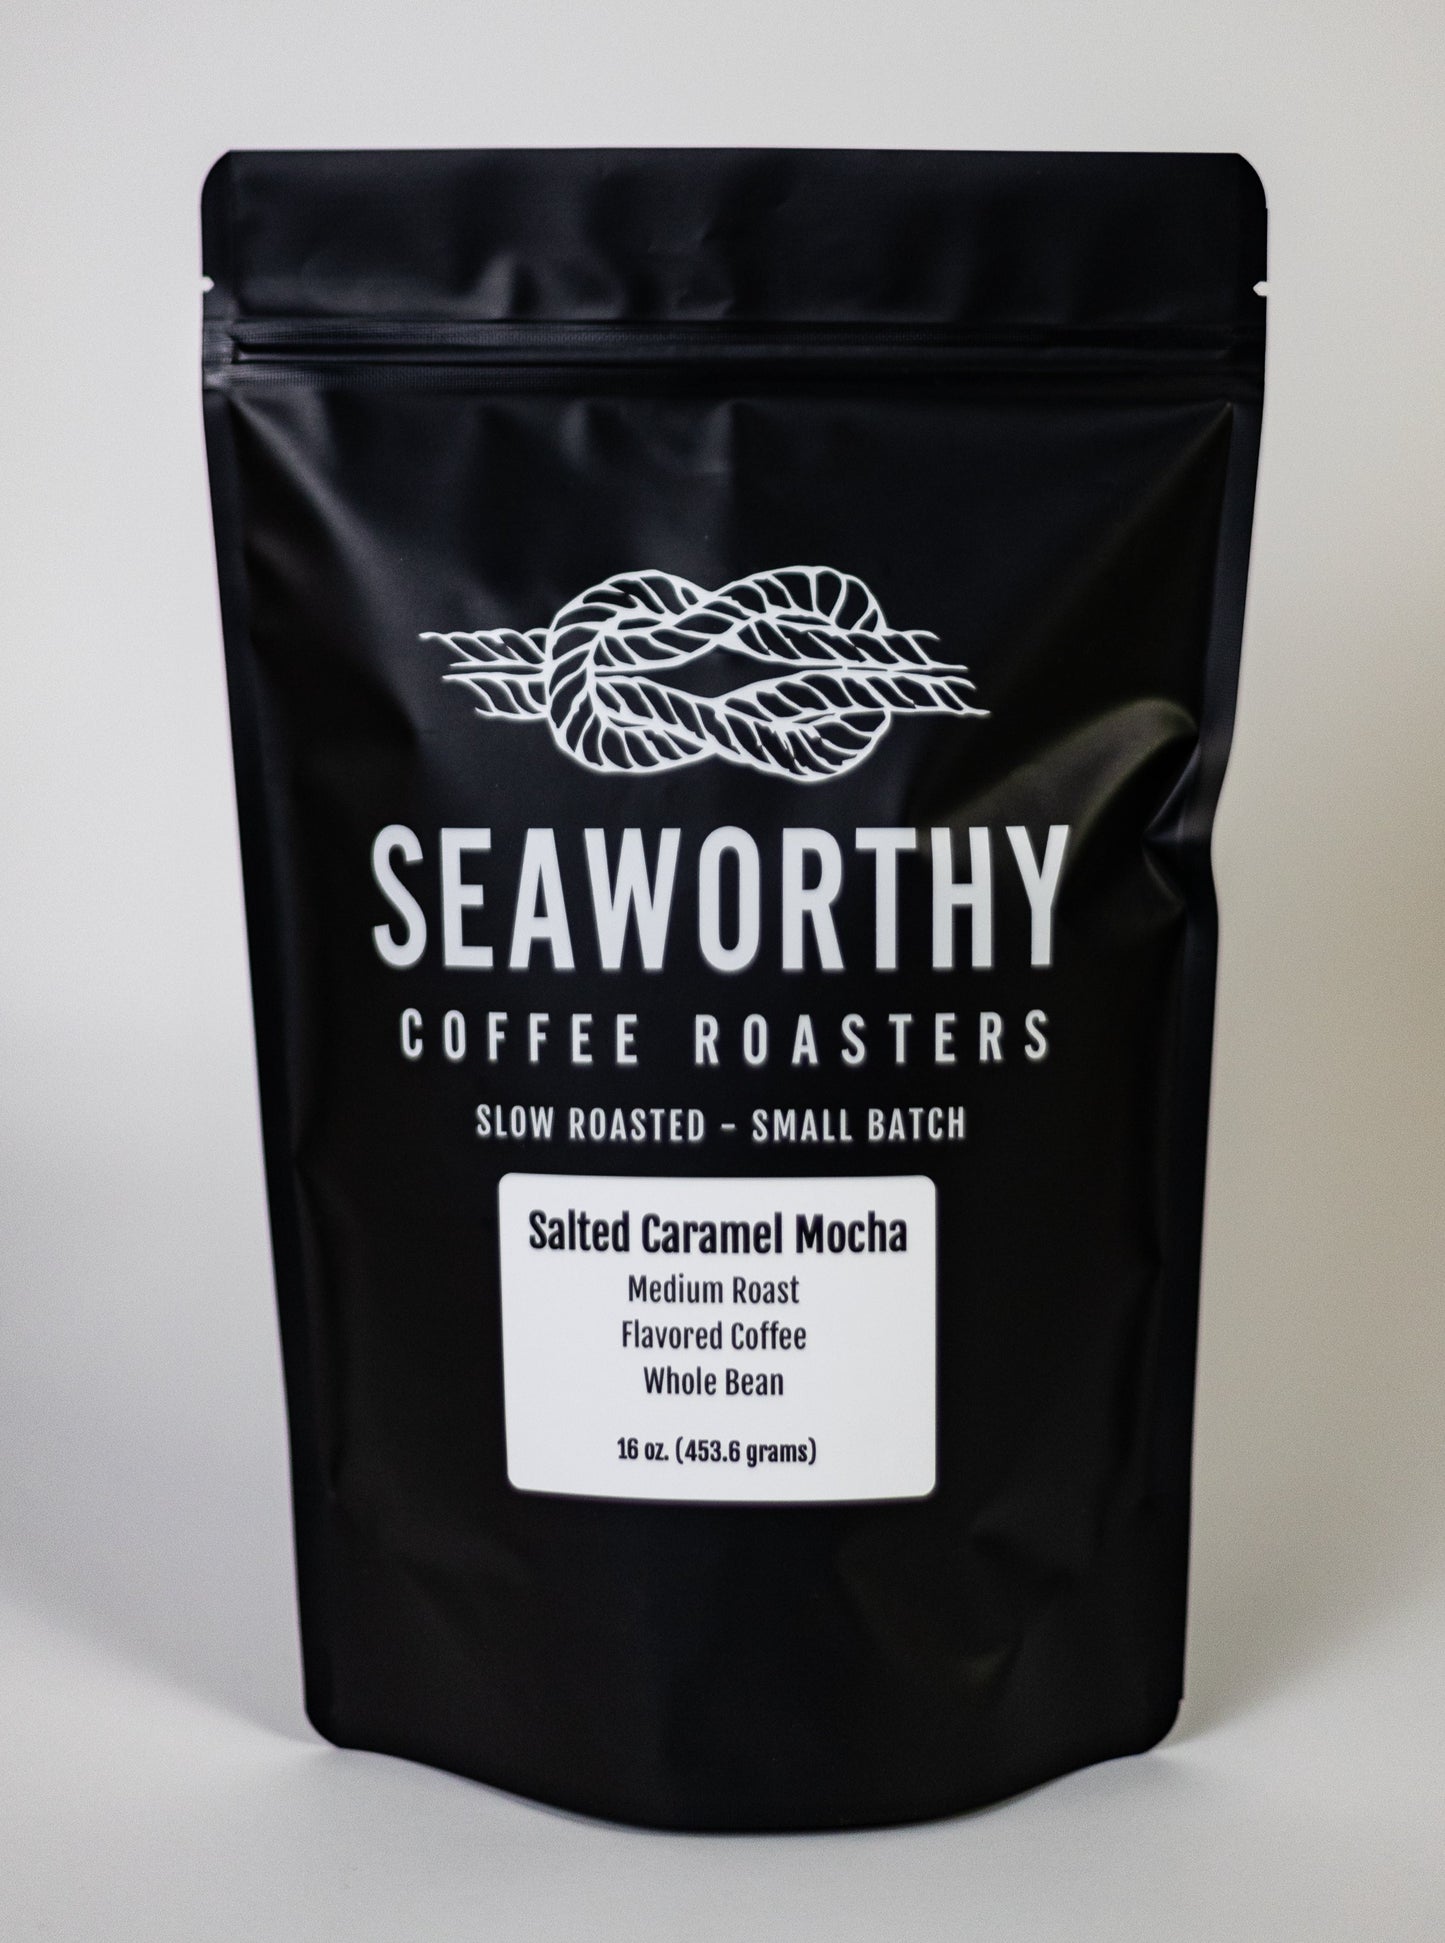 Seaworthy slow roasted, small batch coffee. Salted Caramel Mocha is everything you'd want it to be...chocolaty, caramelly, and just a hint of salt. This flavor has quickly risen to become our #1 selling flavored coffee!